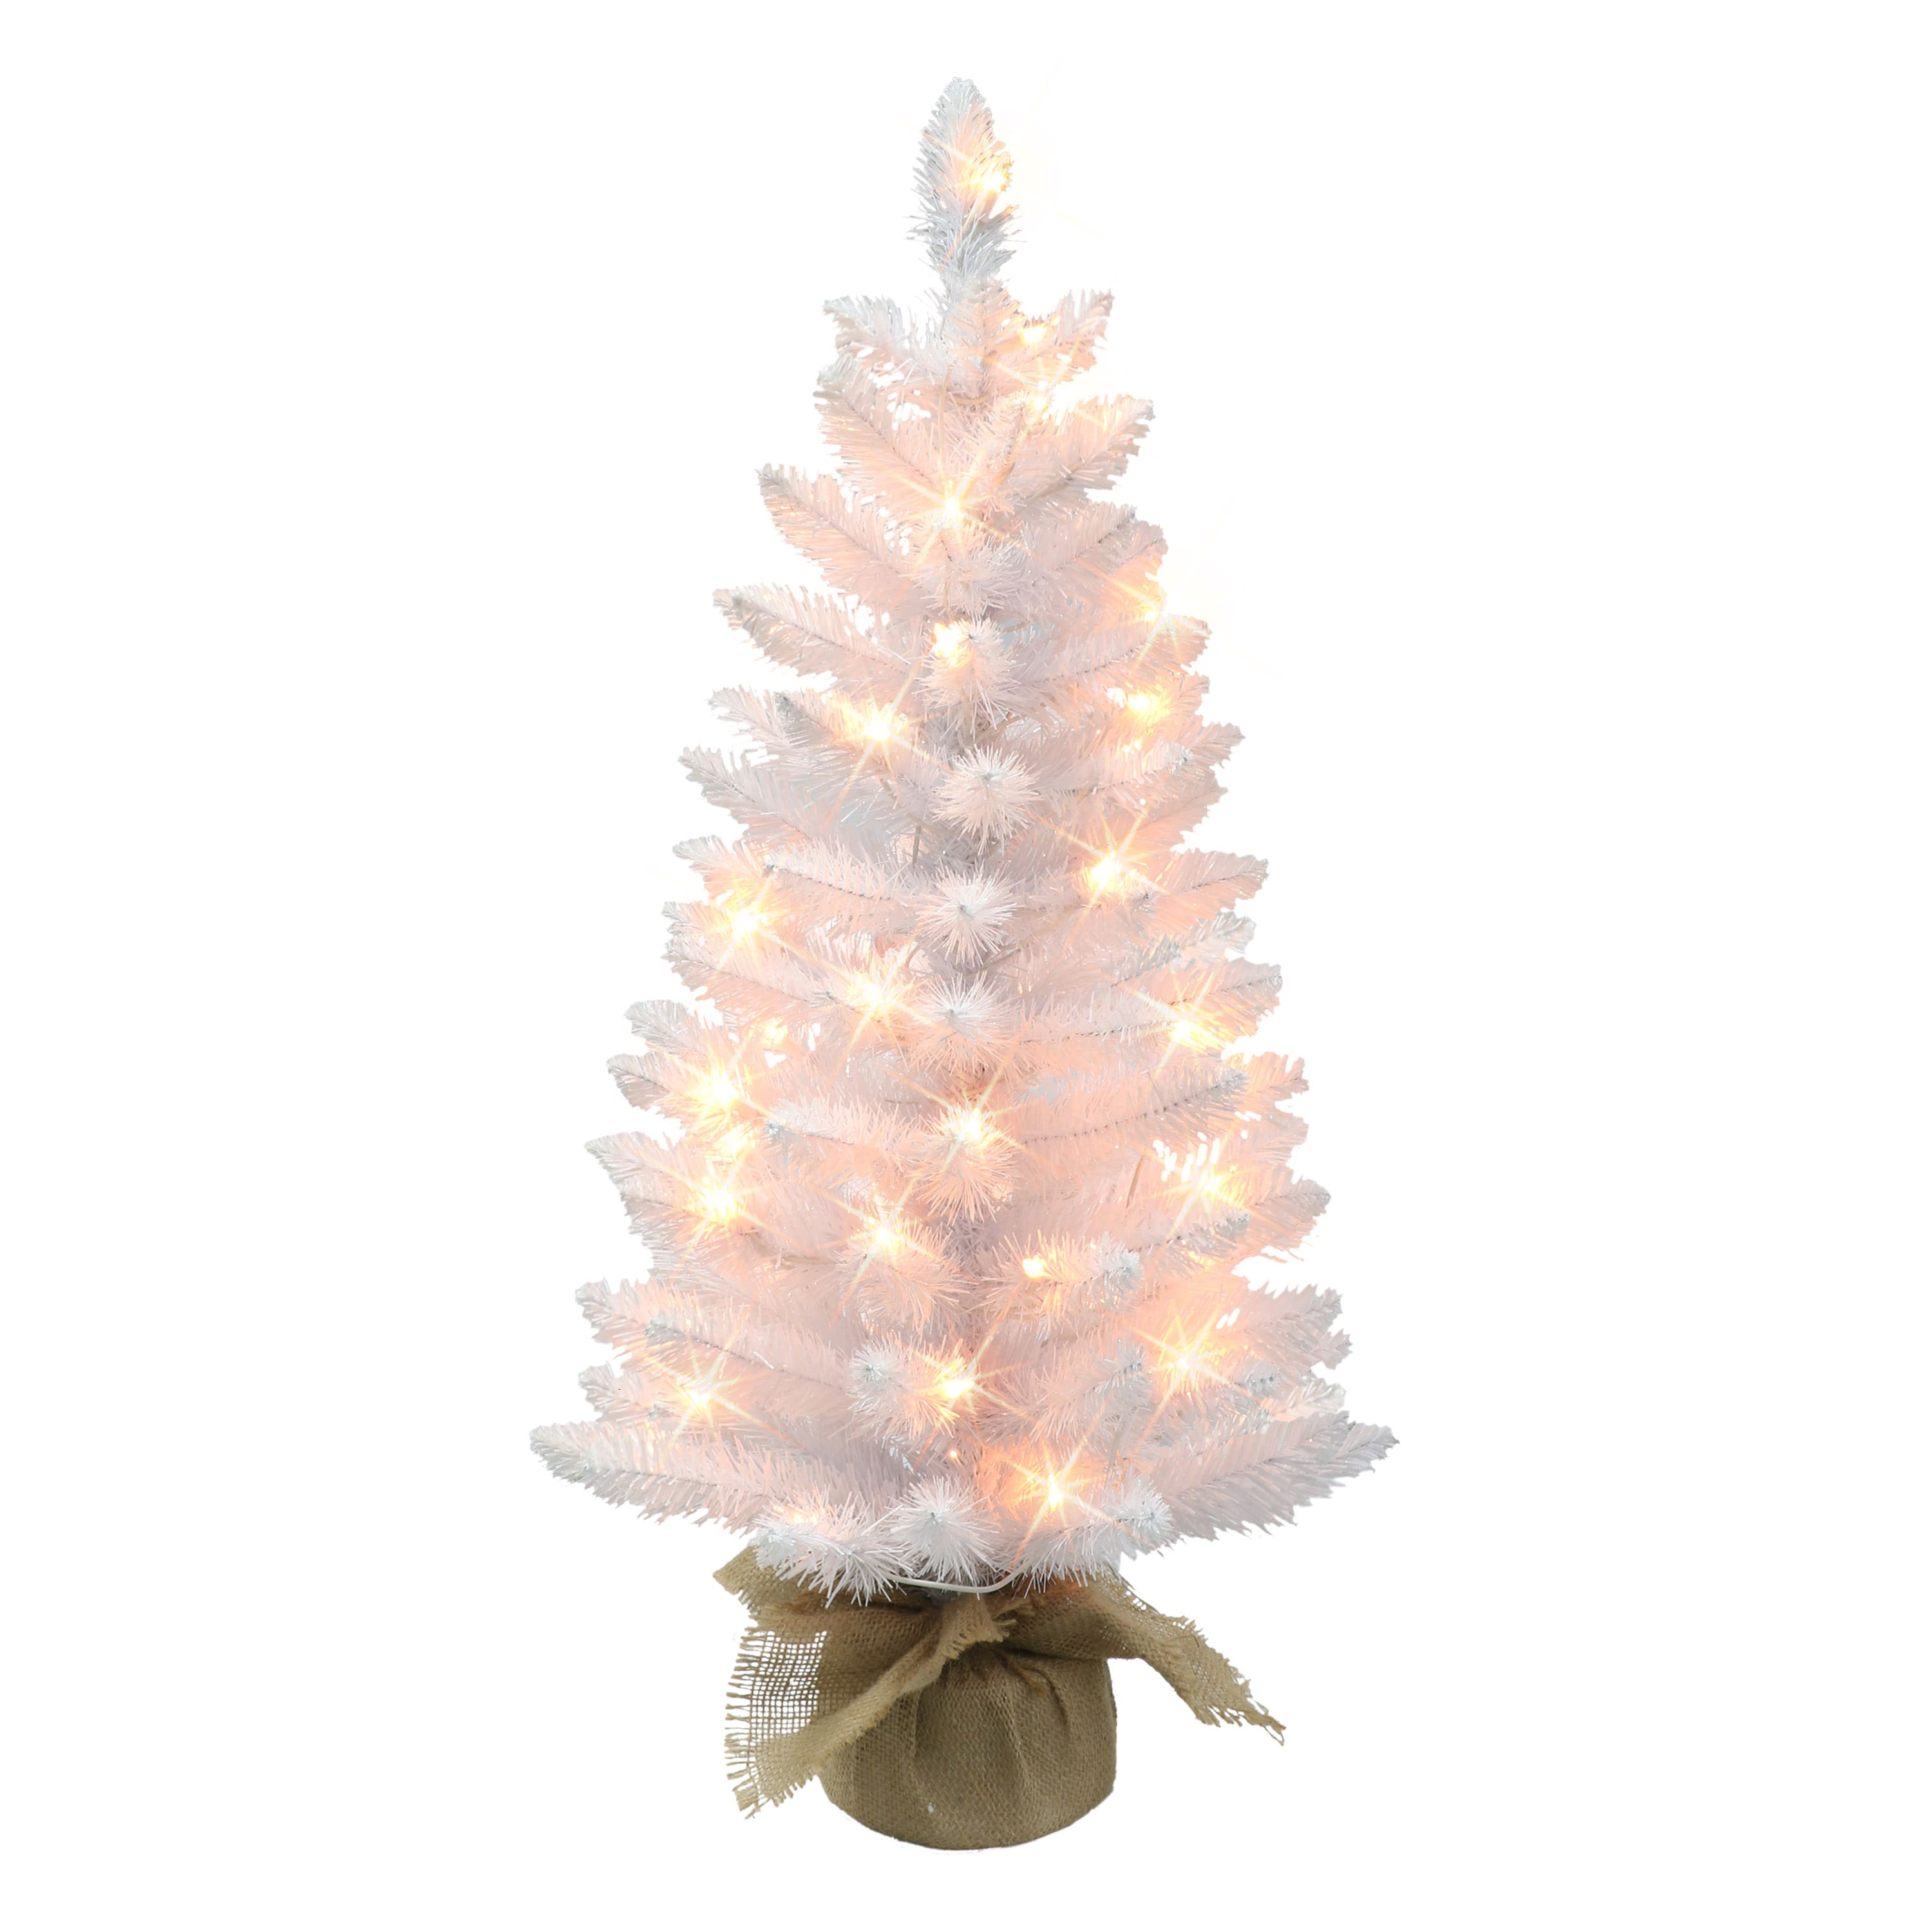 6 Pack: 3ft. Pre-Lit White Artificial Christmas Tree in Burlap Base, Clear Lights